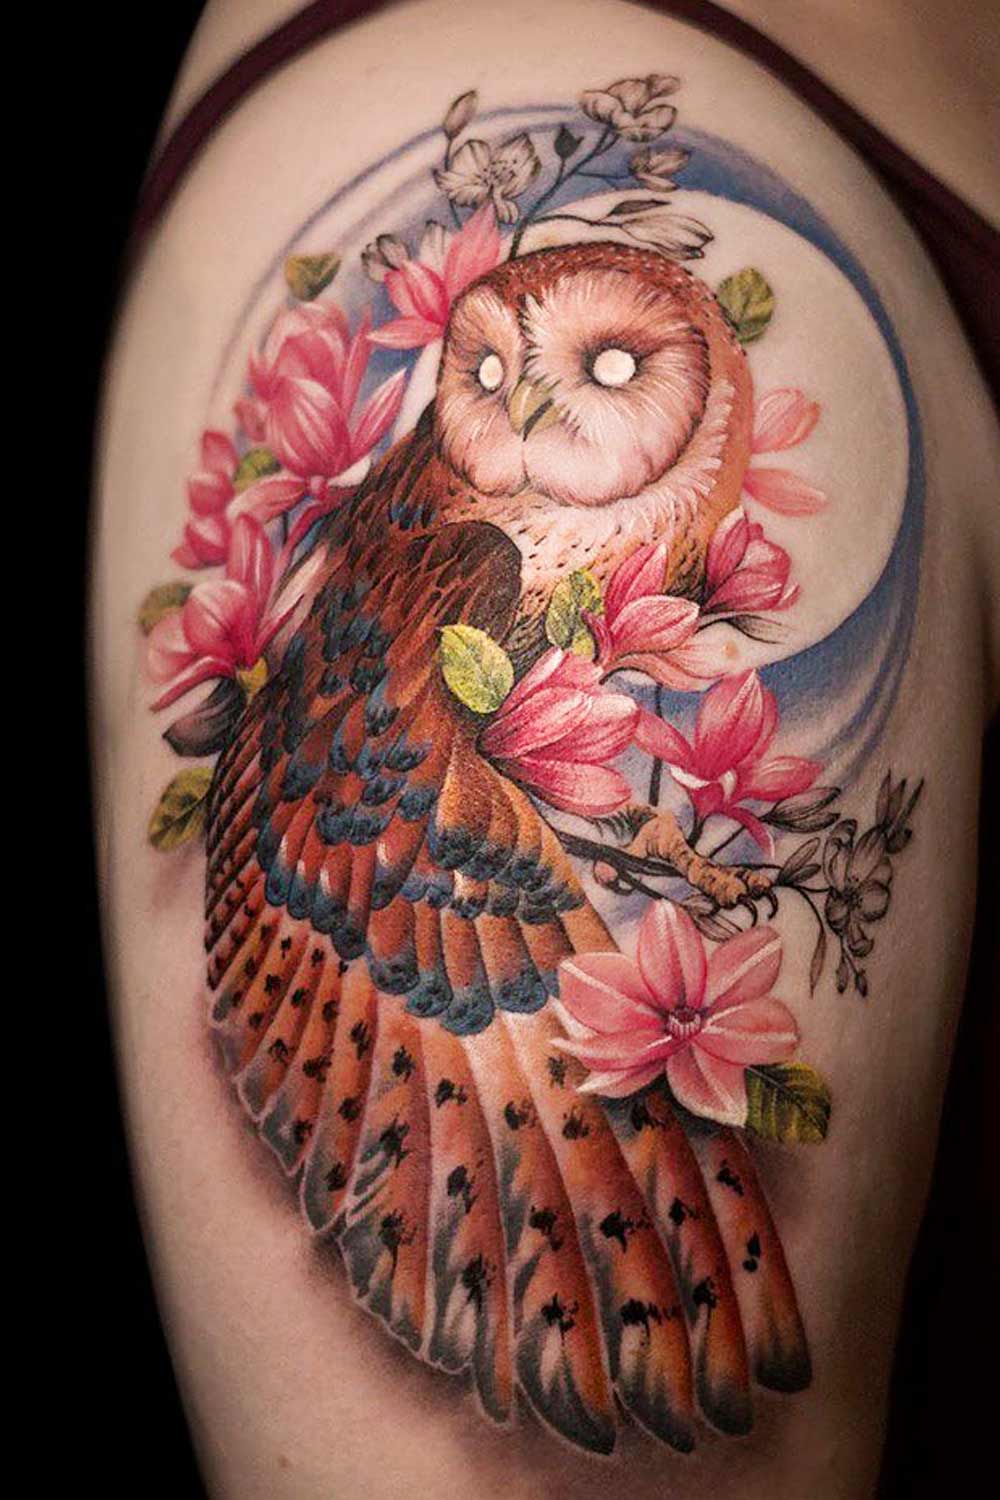 Sassy owl done by Russell at vault tattoo - Charlotte NC : r/tattoos